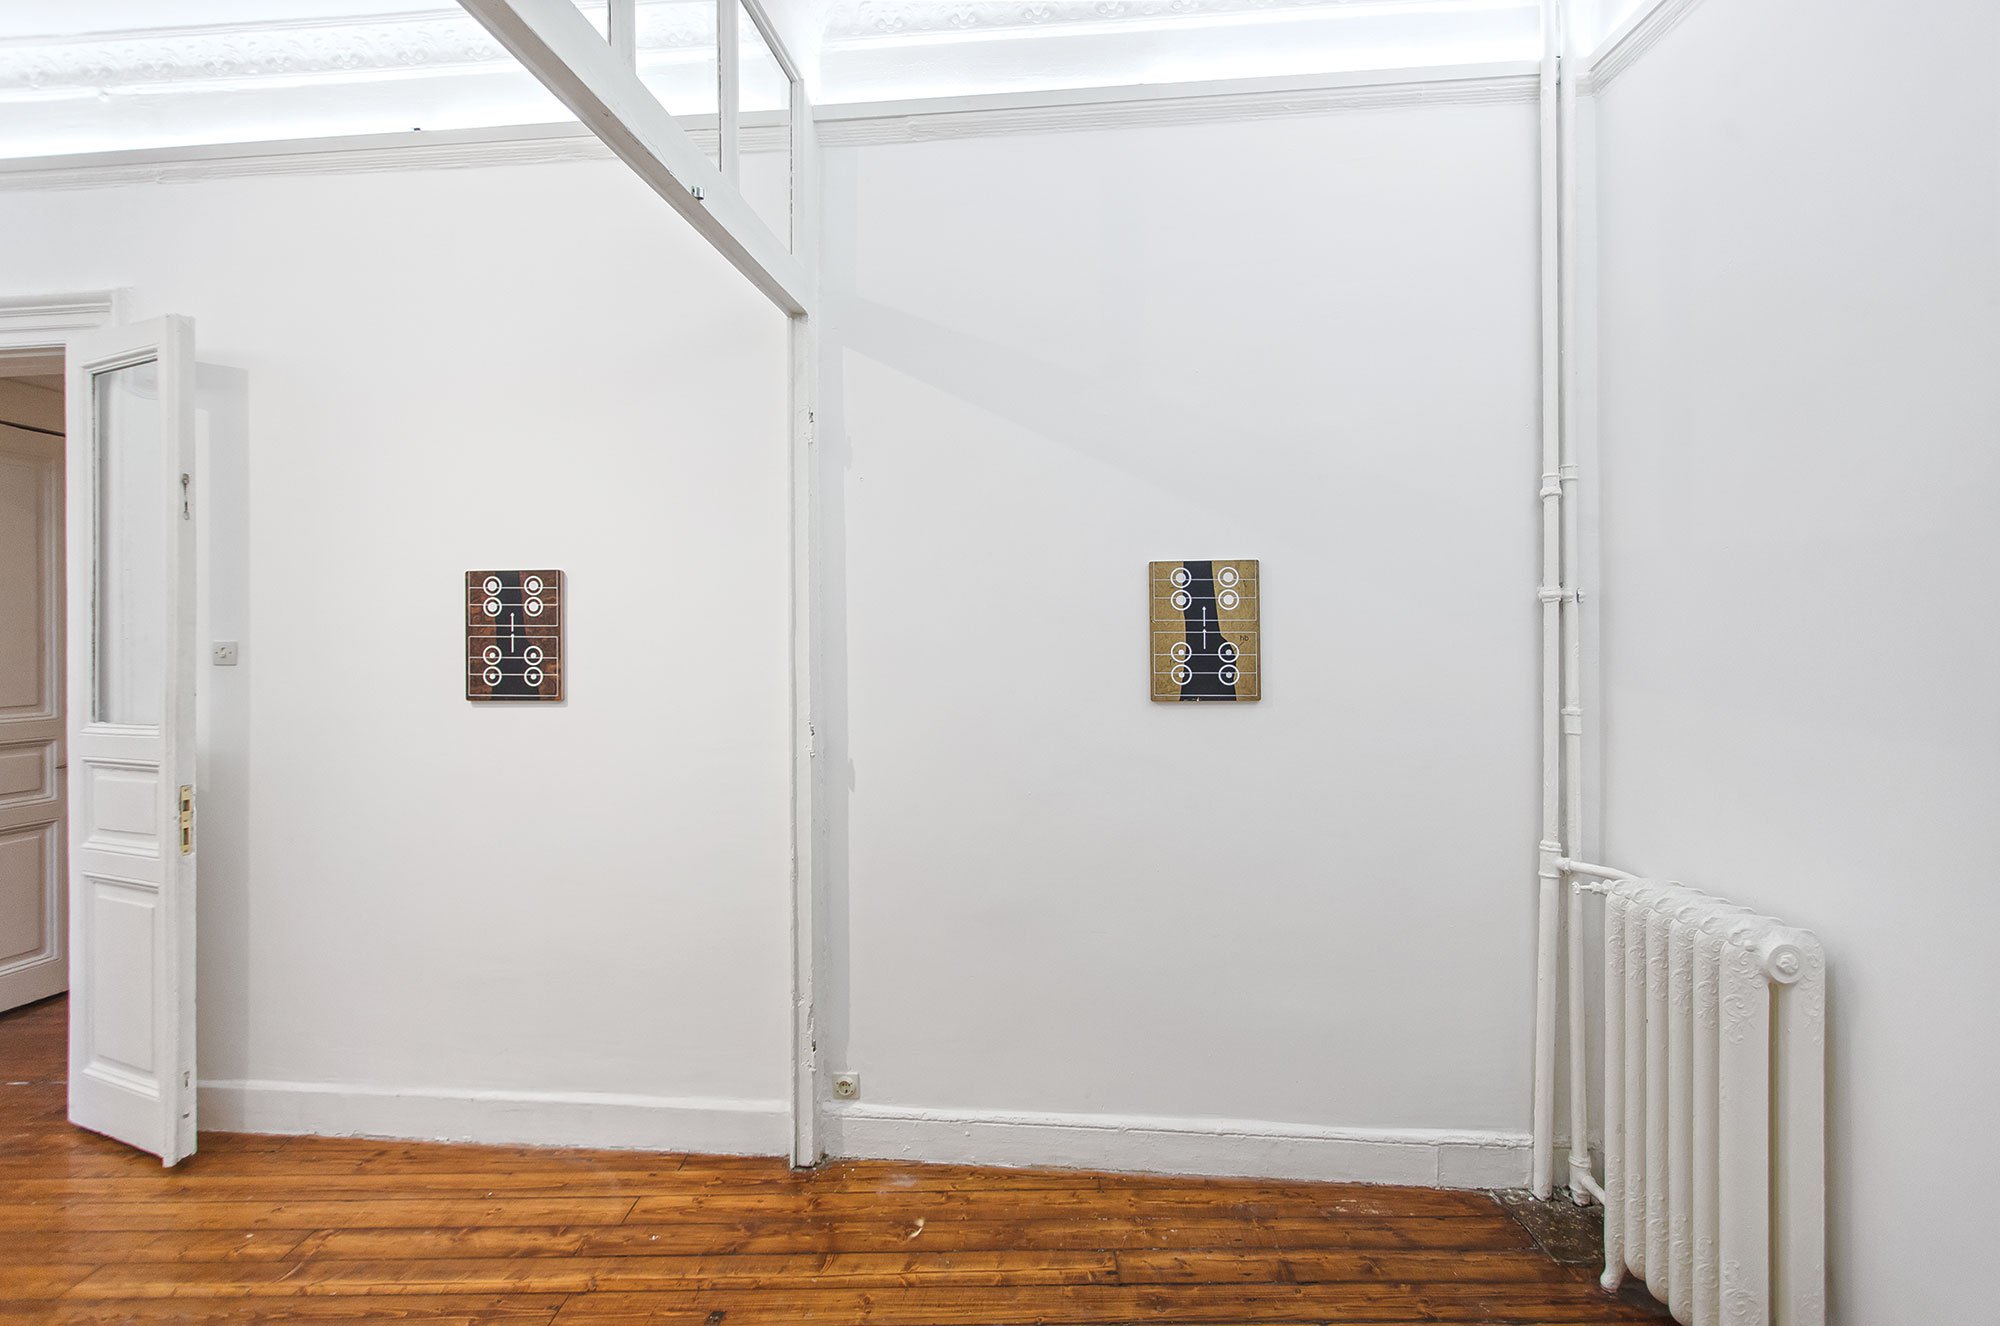 Installation view, James Richards, The Screens, Rodeo, Istanbul, 2013